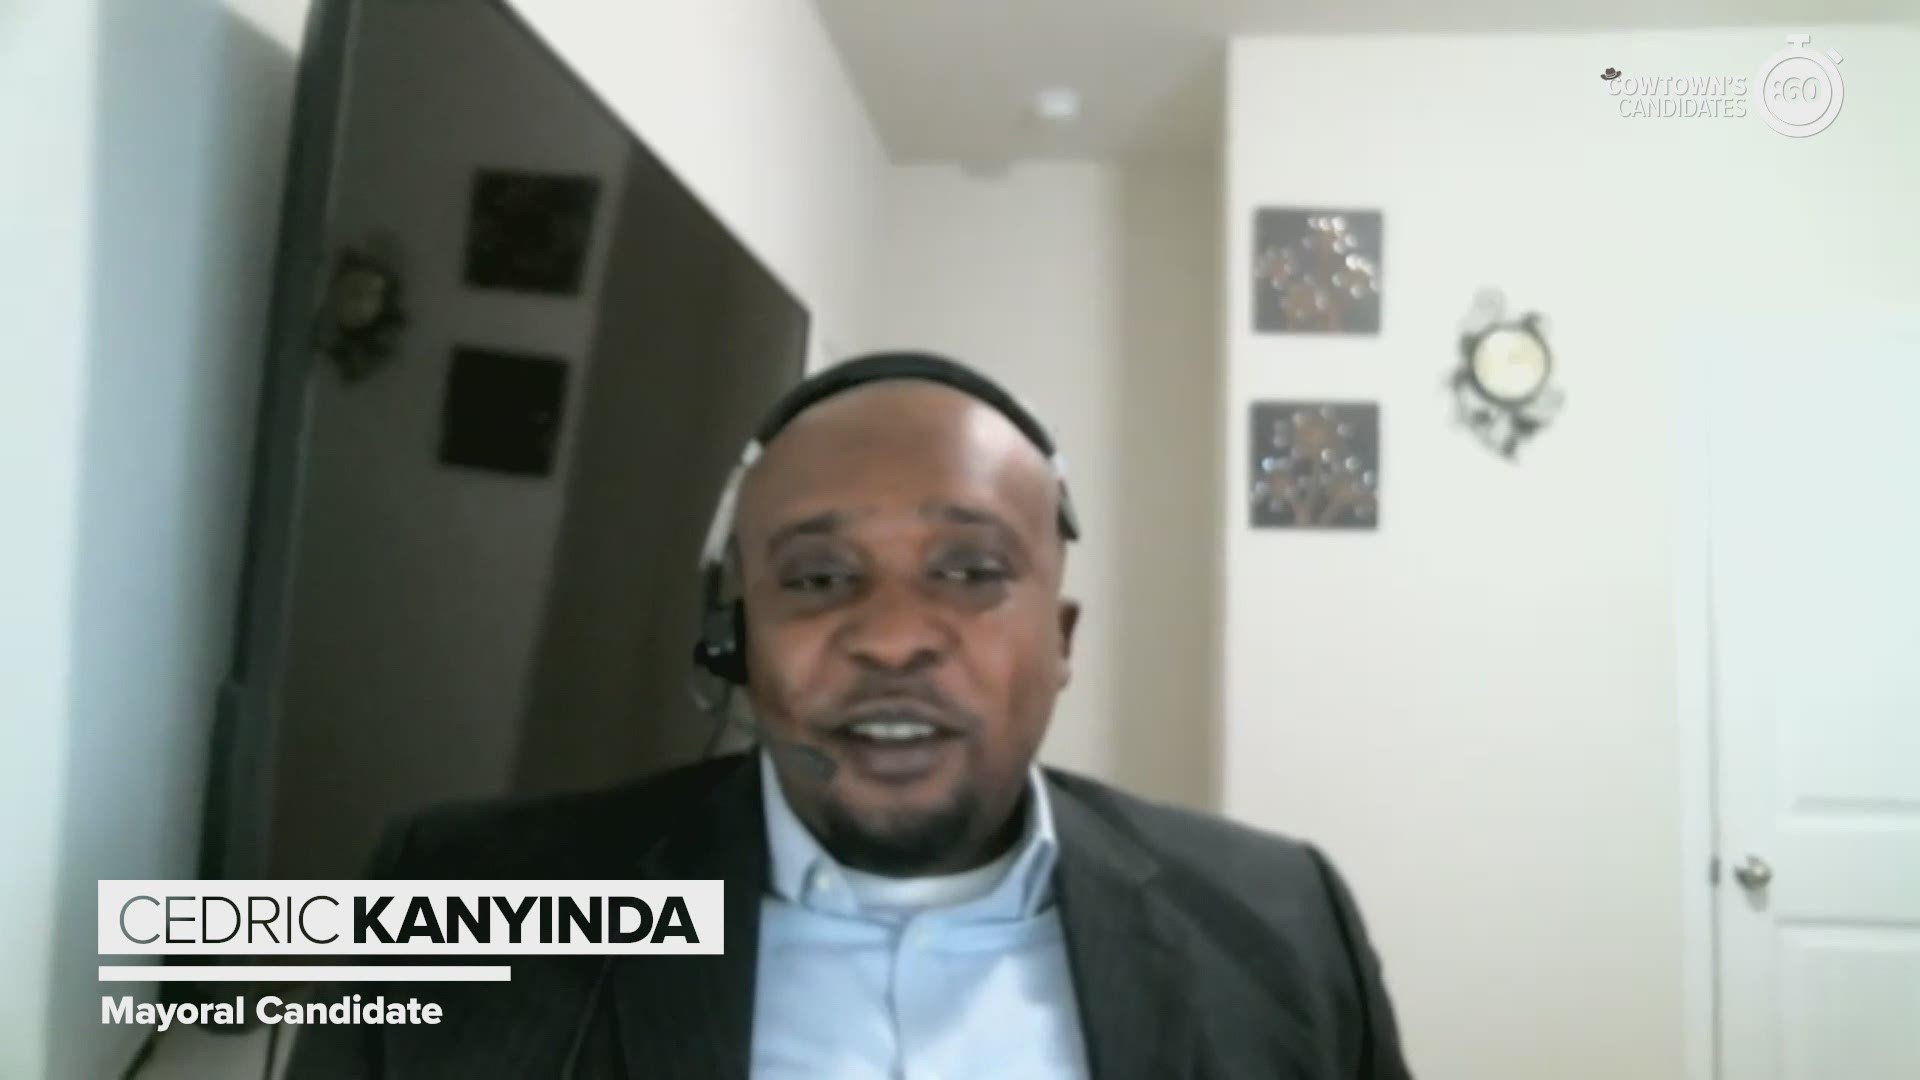 Here's a breakdown of candidates in 60 seconds. This is candidate Cedric Kanyinda.